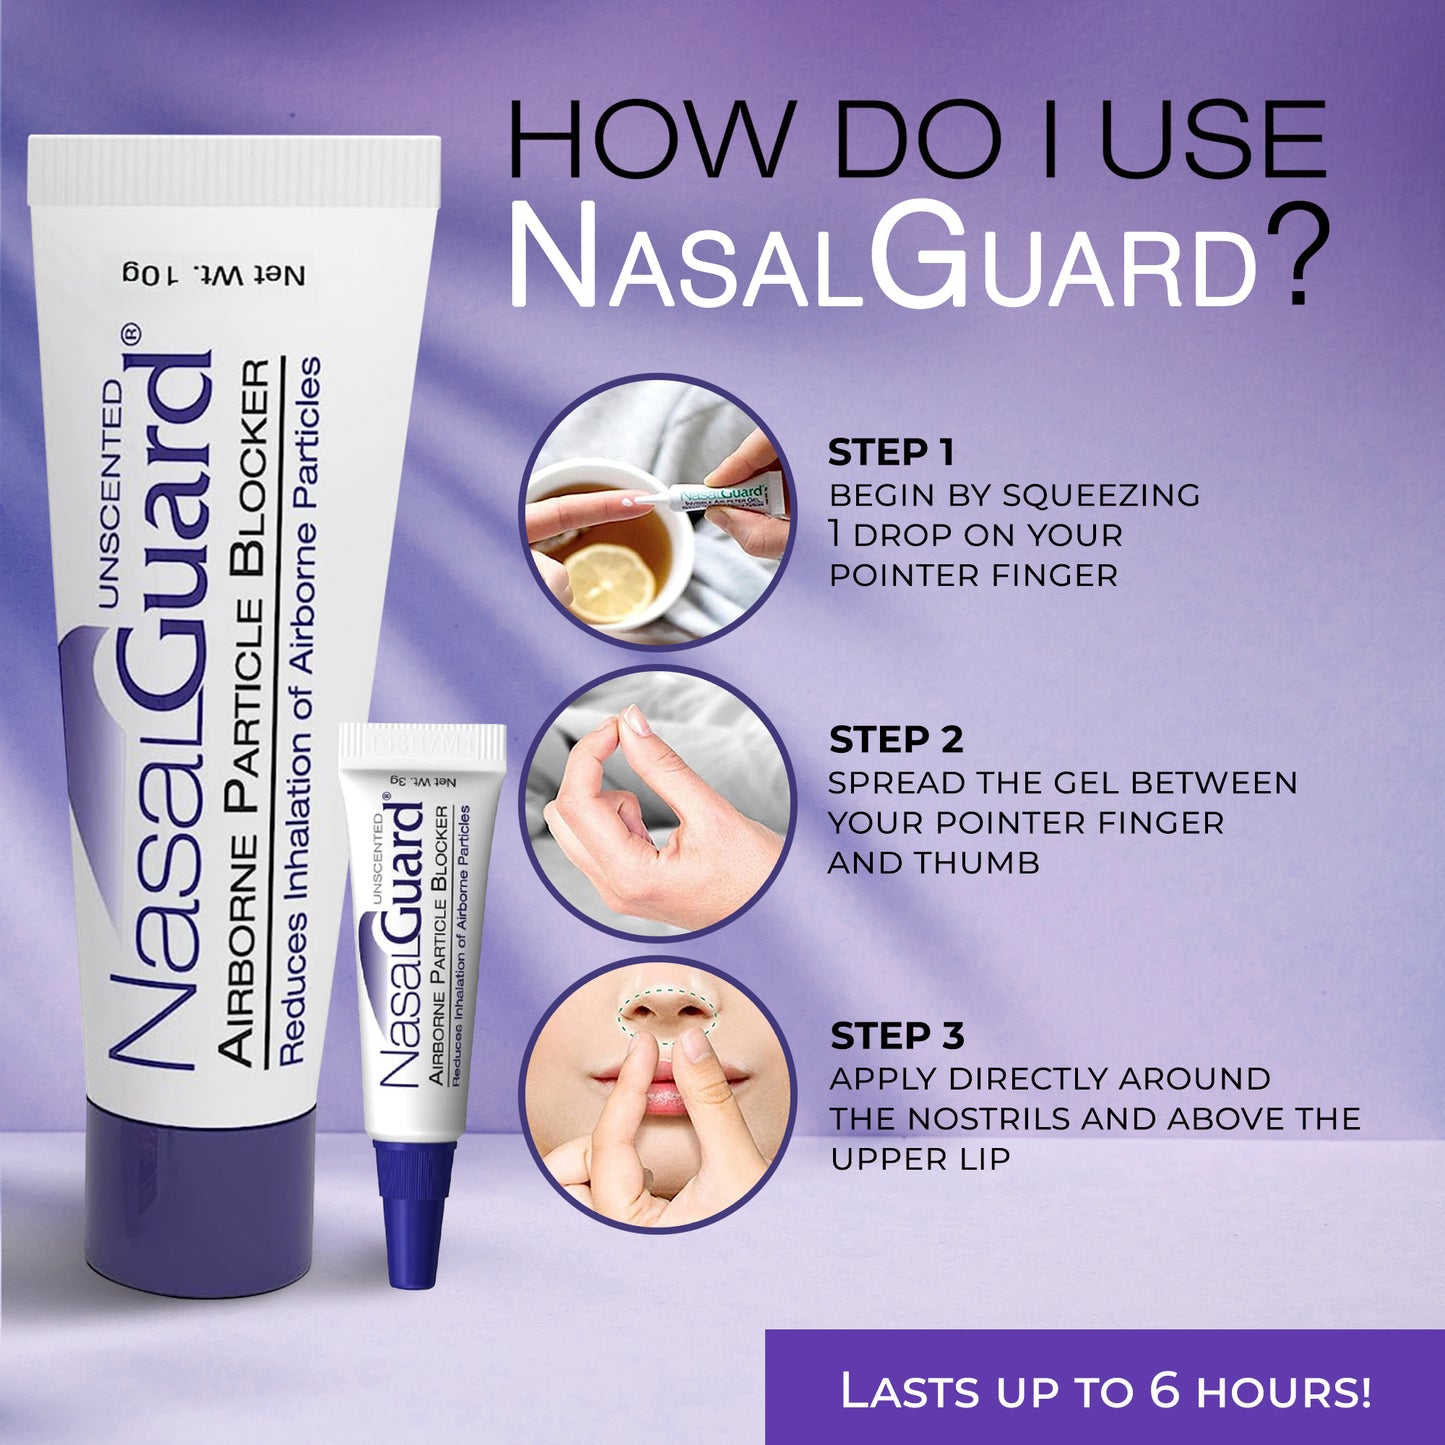 NasalGuard For Air Travelers - Allergy Relief Gel, Drug-Free, Unscented, 3g Tube